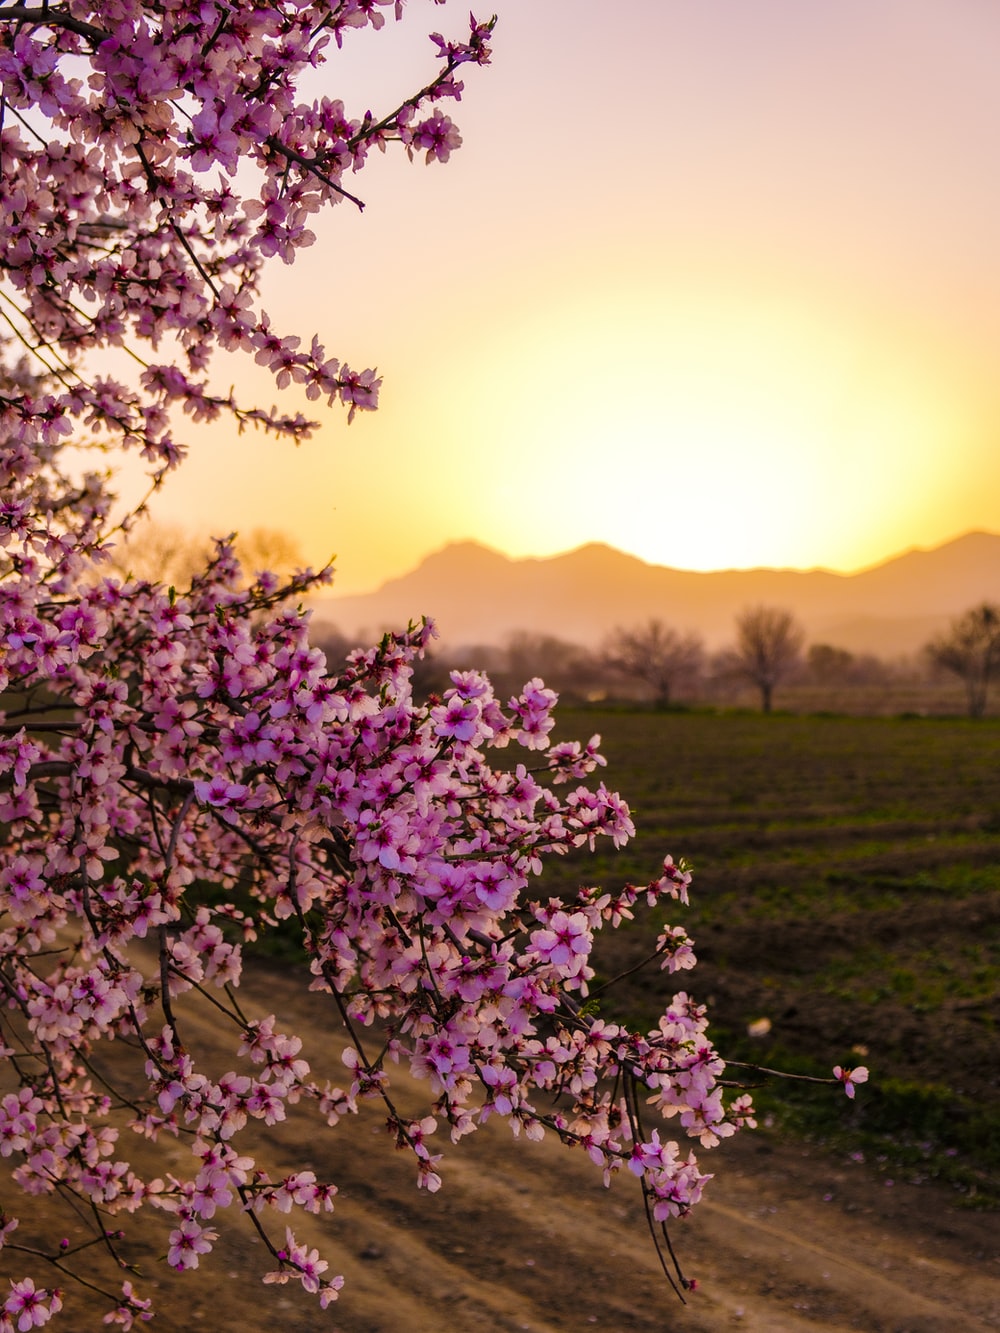 Sunrise Flowers Picture. Download Free Image